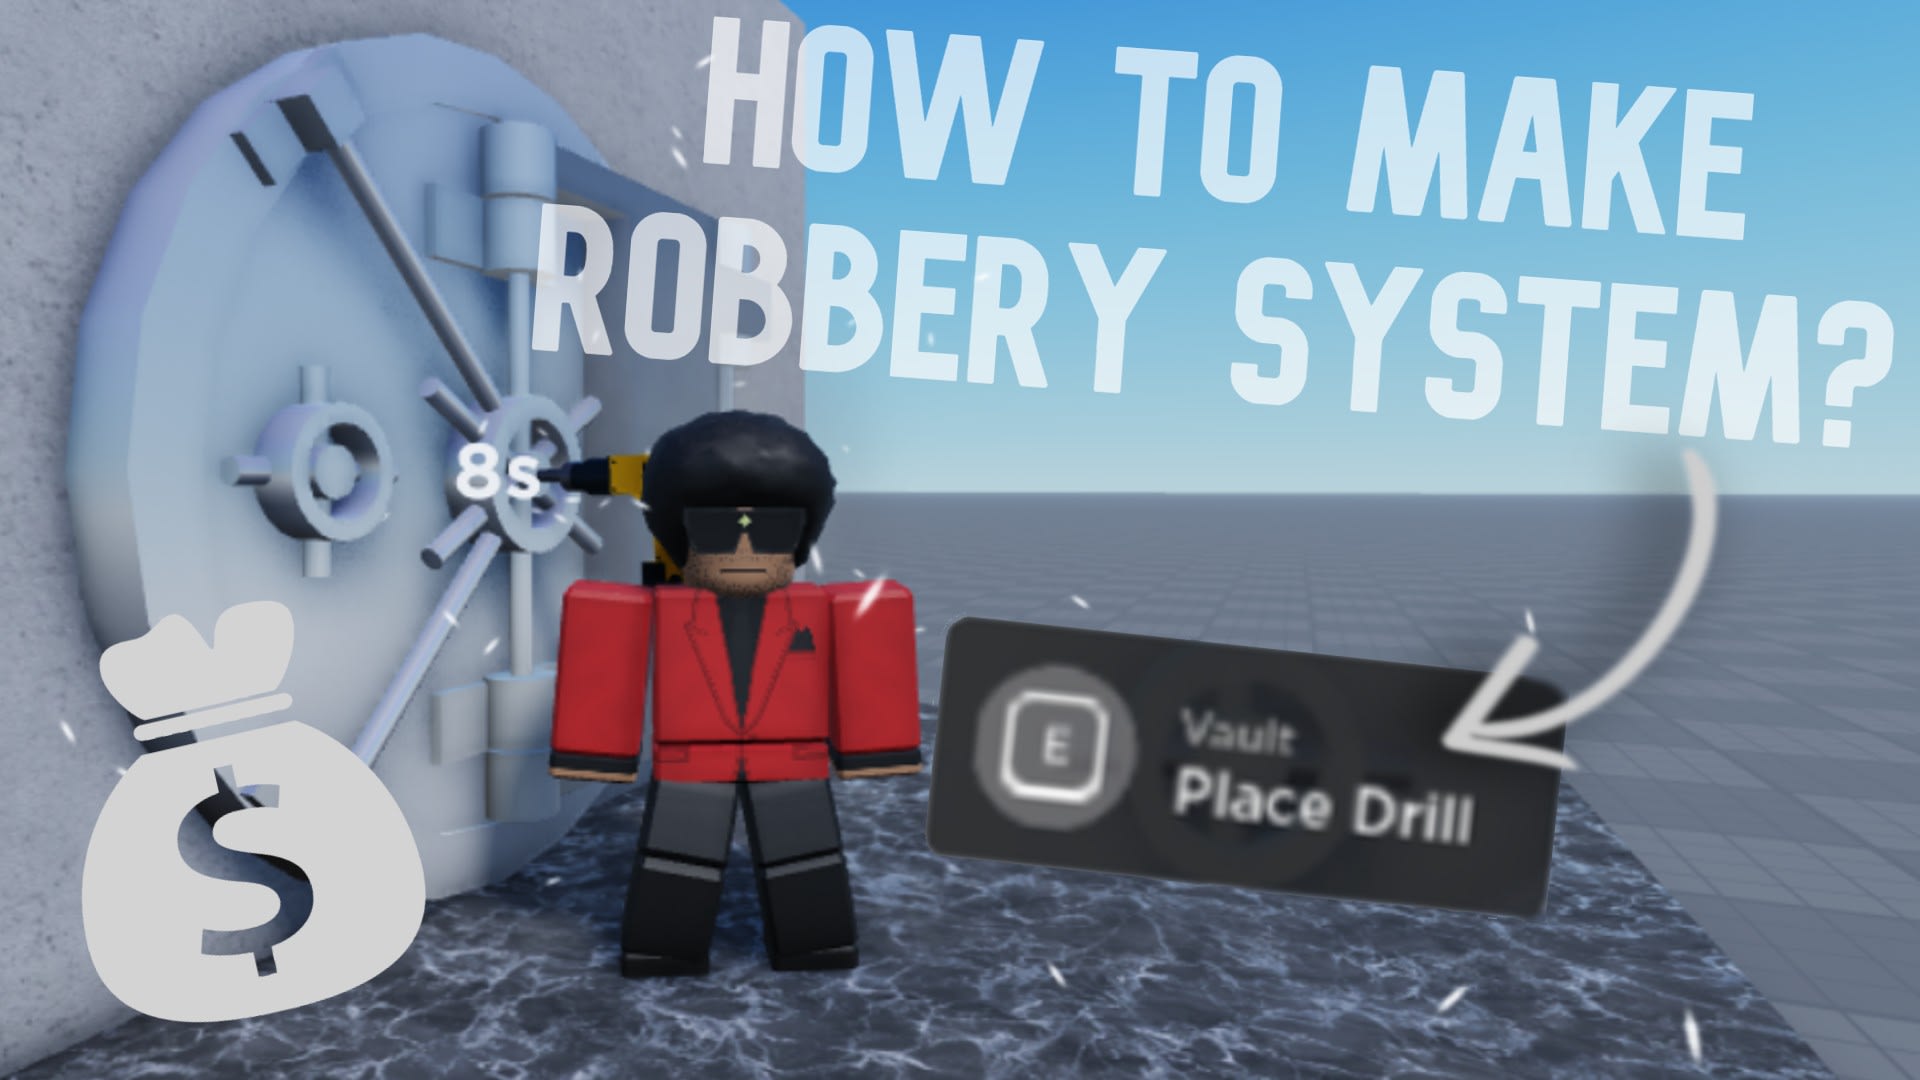 Script any system for you roblox game